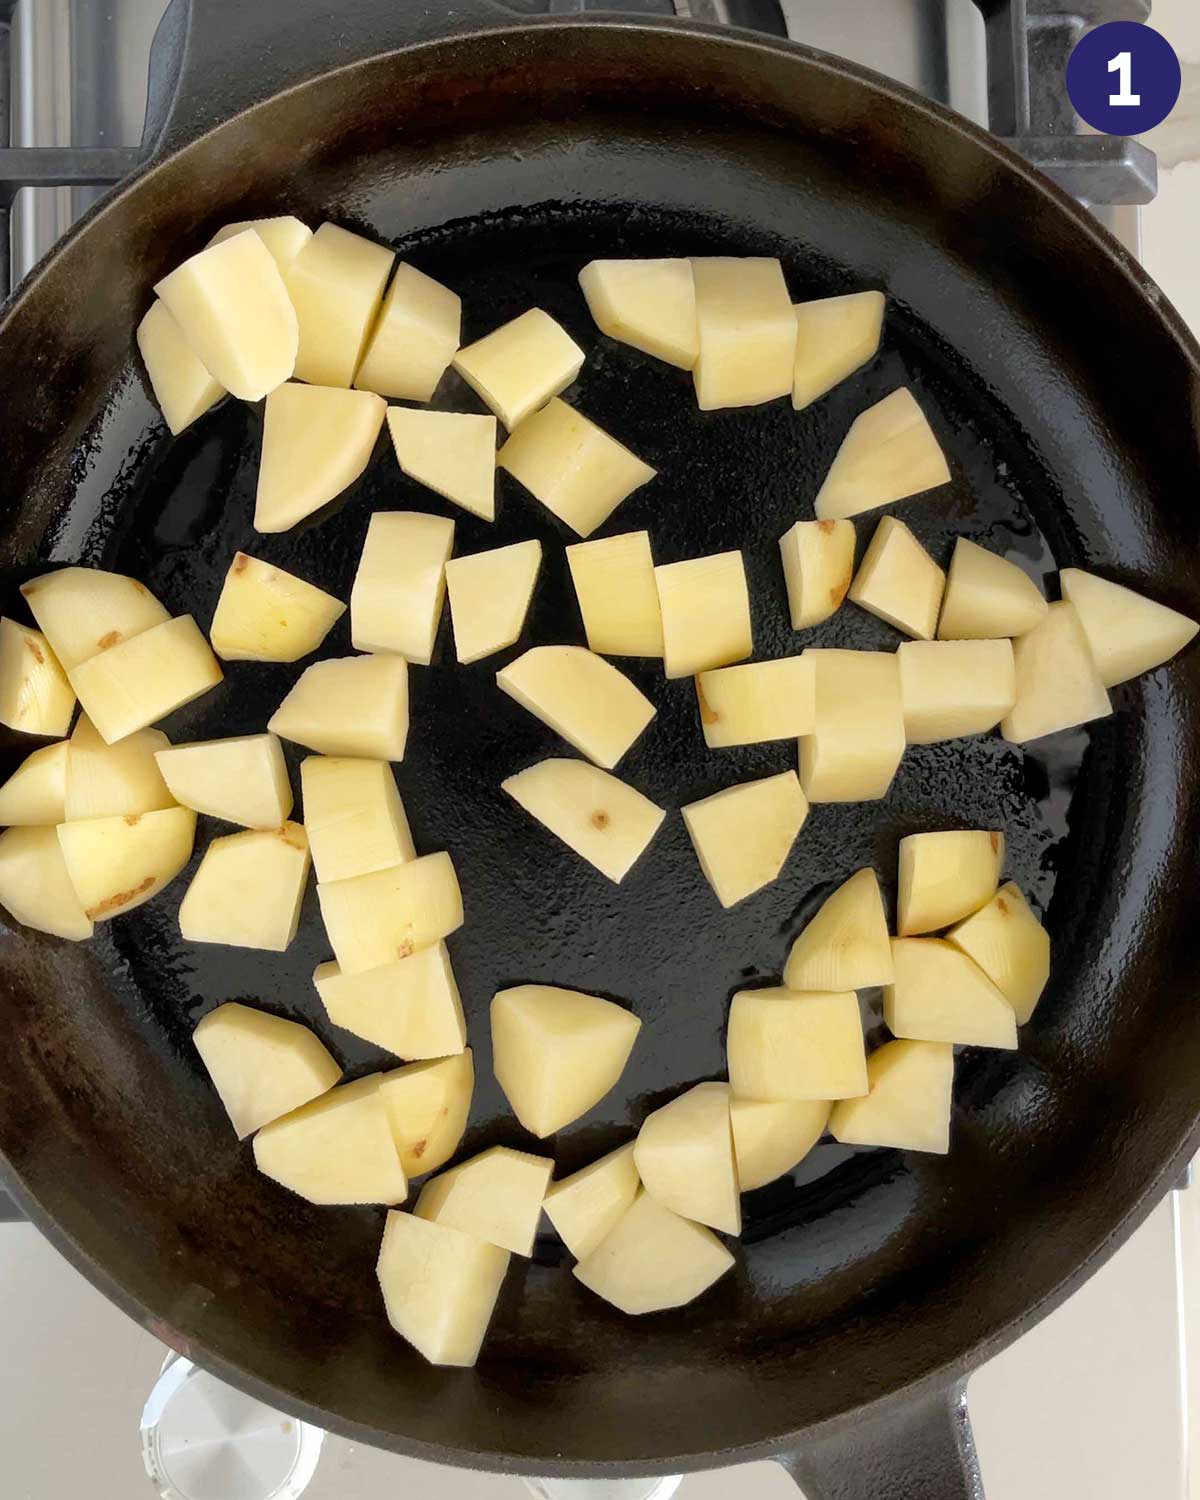 Diced potatoes in a cast iron pan at the beginning of roasting.